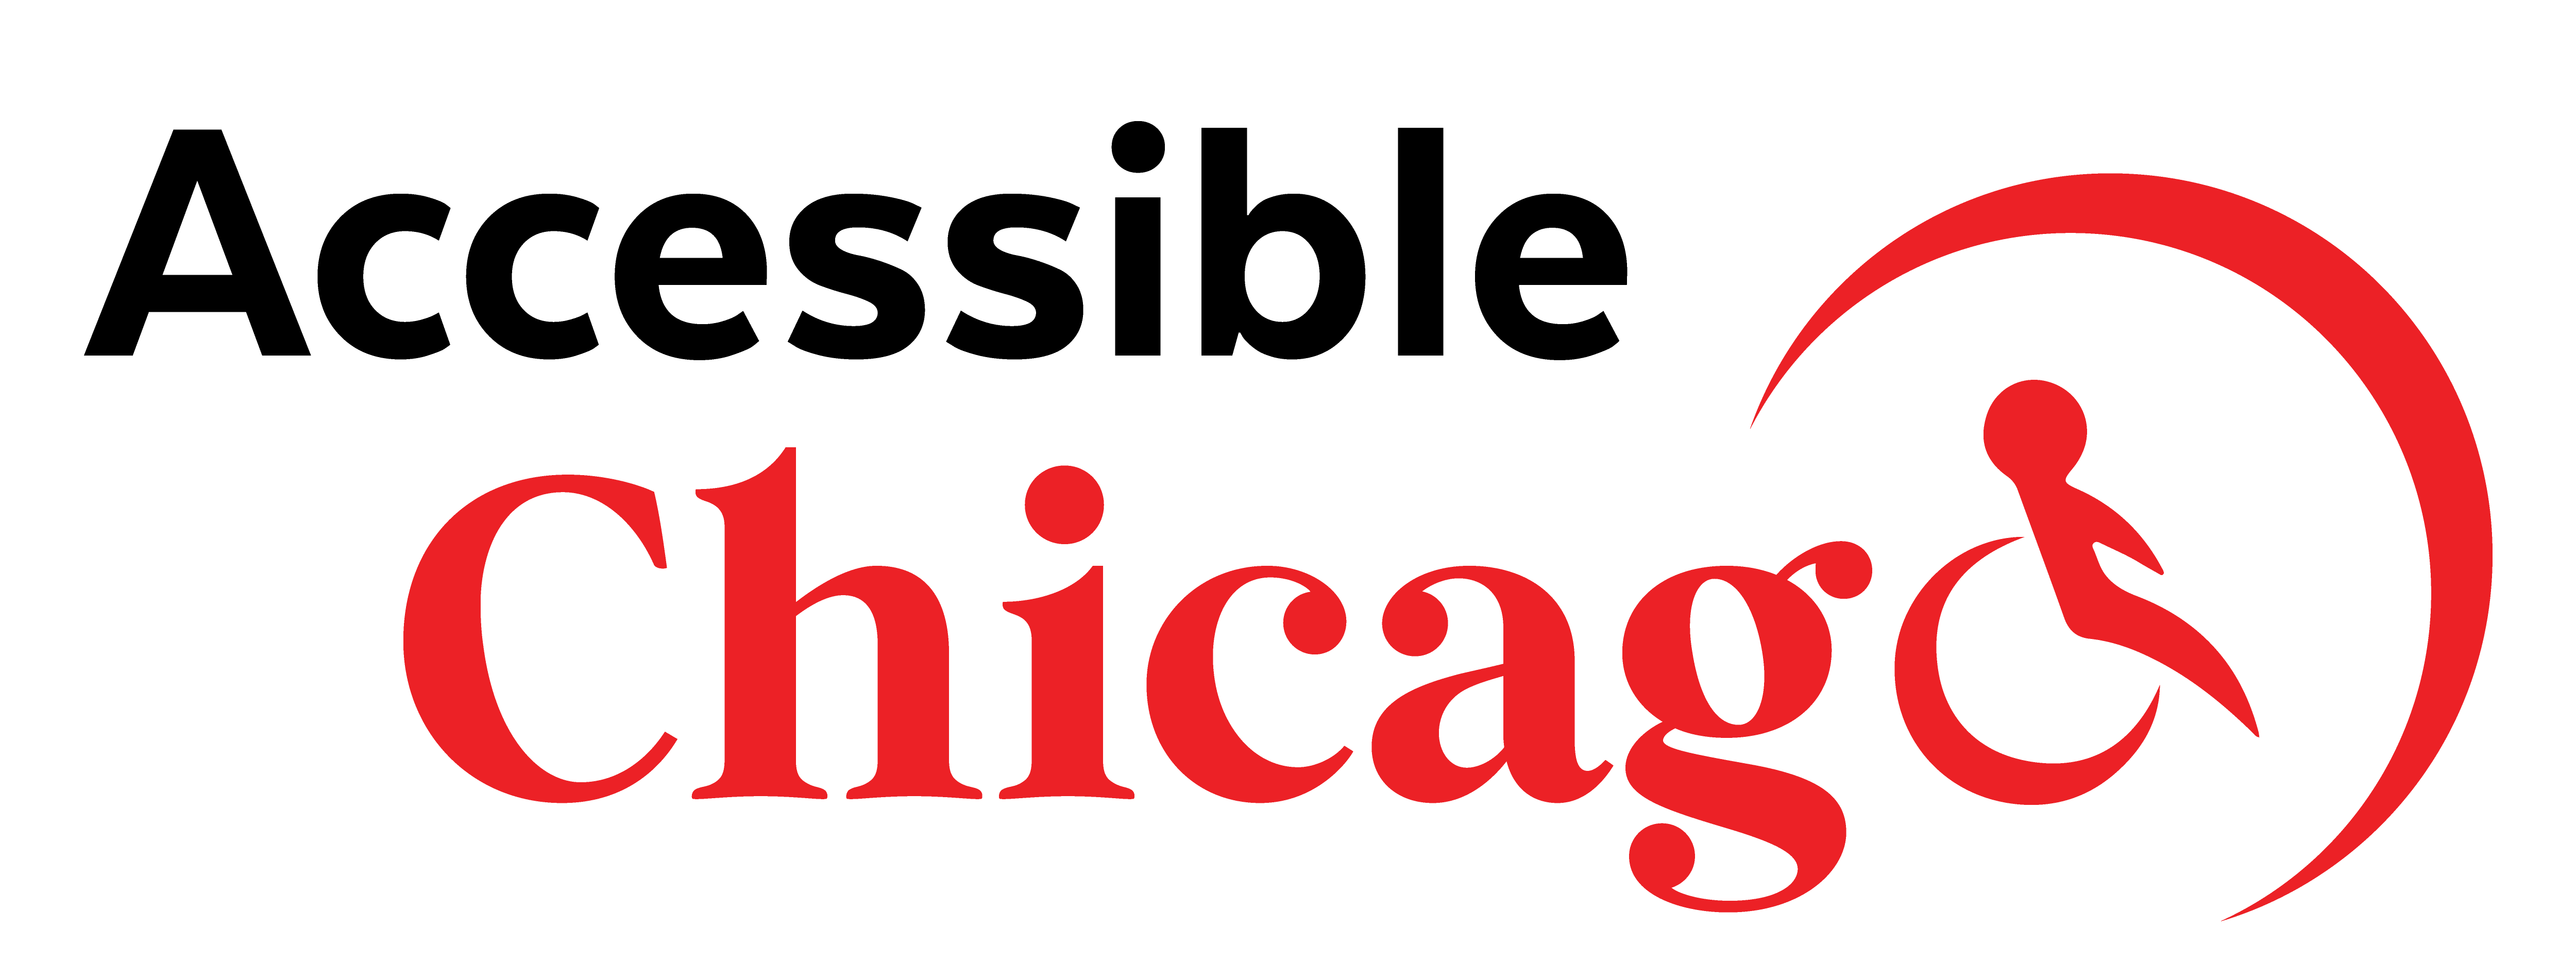 Accessible Chicago logo - Accessible written in black sans serif lettering above the word Chicago in red. The O of Chicago is the stylized person in wheelchair from the Fun4theDisabled logo and it's surrounded by a red swoop to complete the shape of the O.